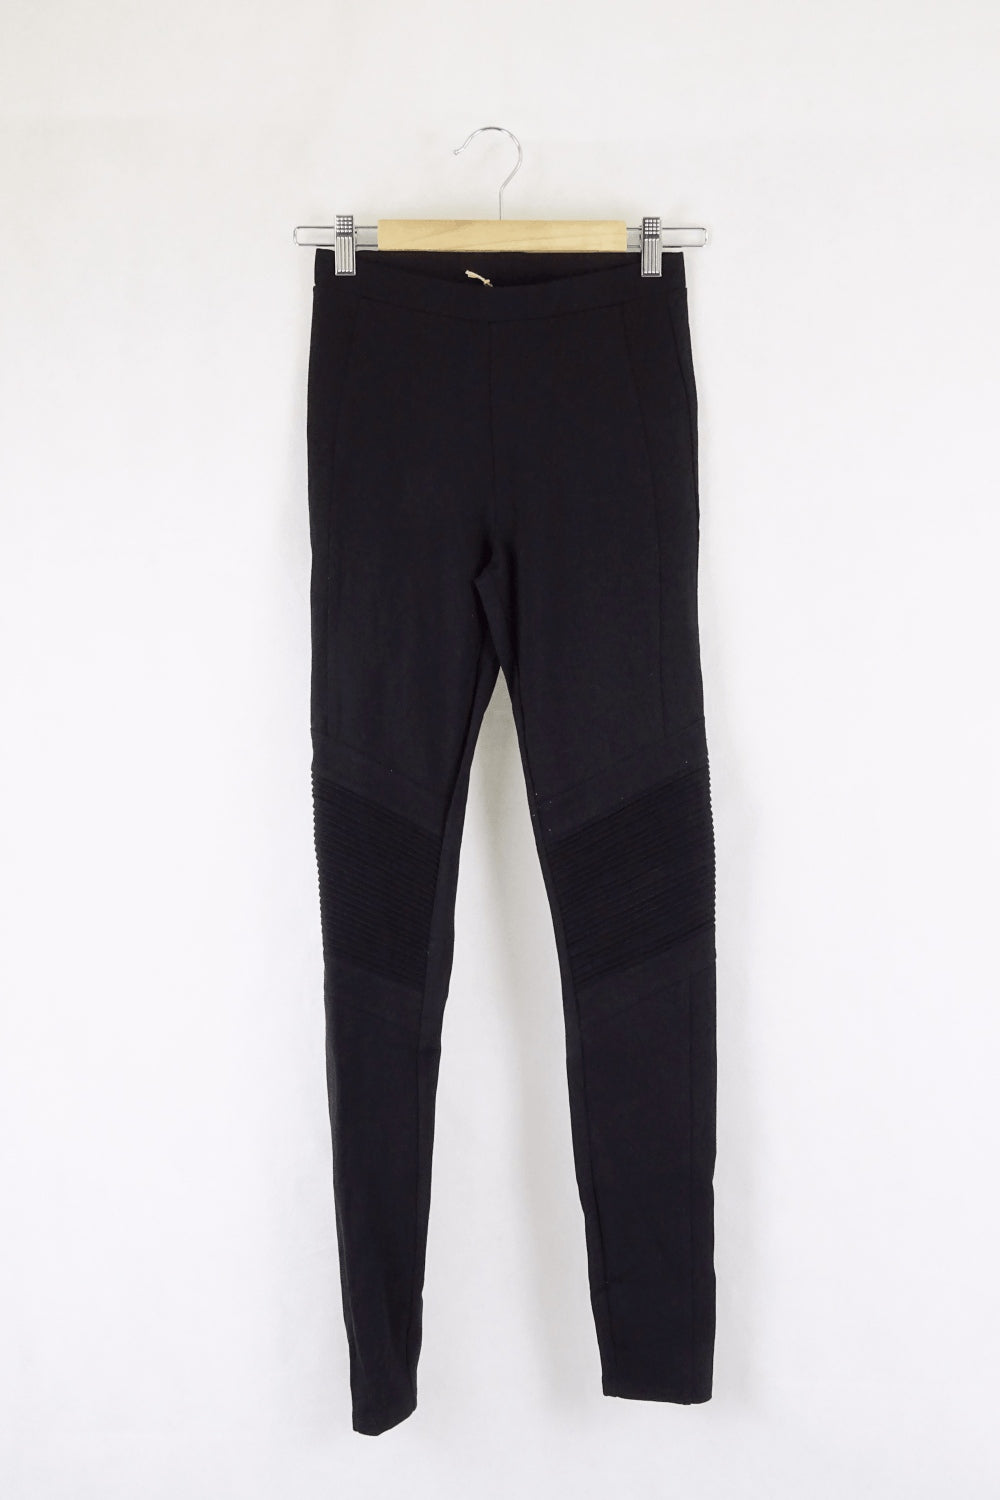 French Connection Black Leggings 6